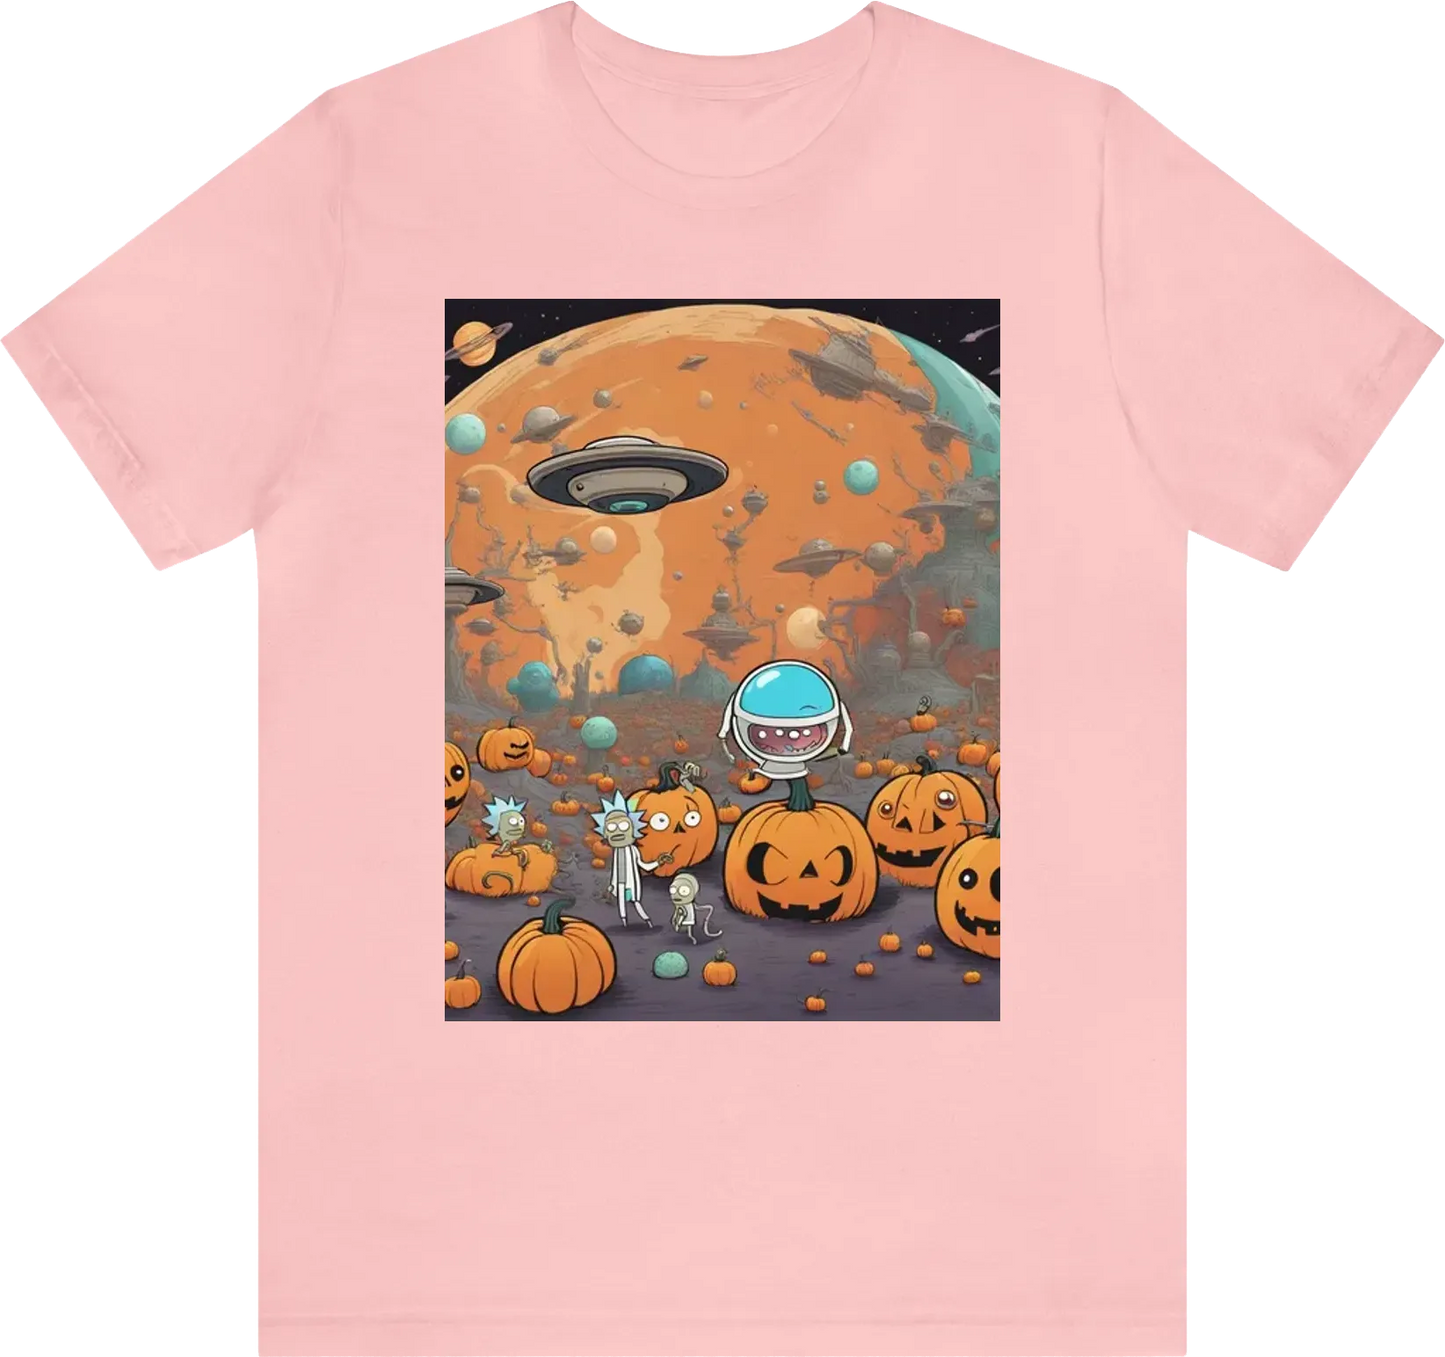 "Create a vivid and imaginative pumpkin universe image inspired by the wacky world of 'Rick and Morty.' Picture a pumpkin-shaped planet floating in space, populated by bizarre pumpkin creatures, and infused with the show's unique humor and sci-fi elements